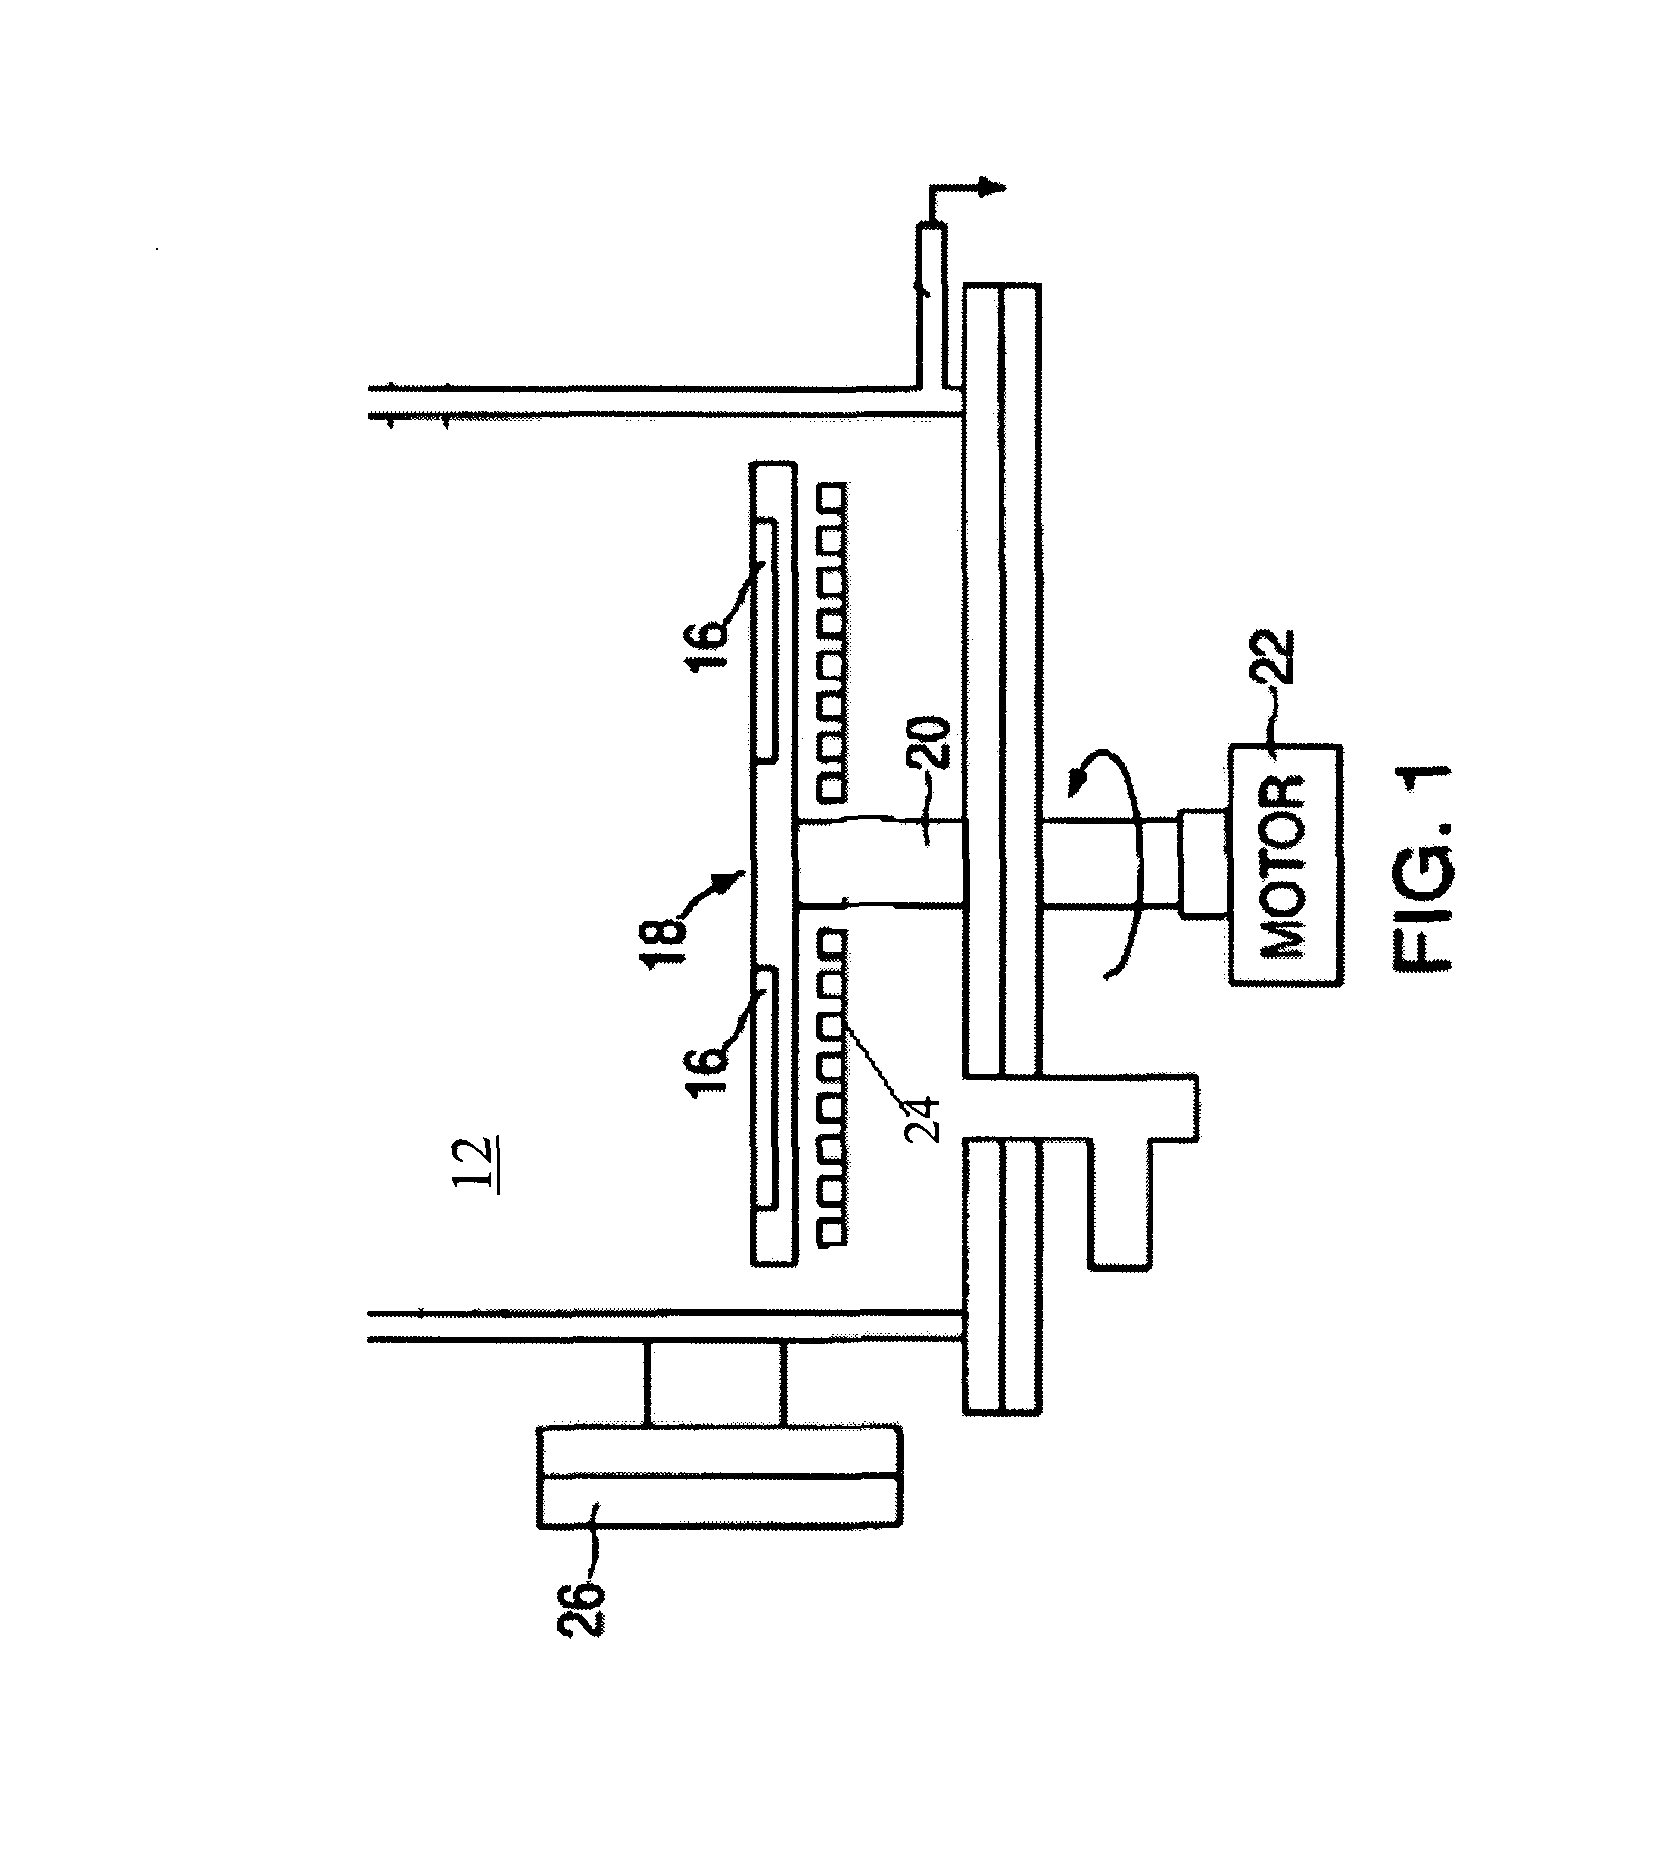 RF heater arrangement for substrate heating apparatus